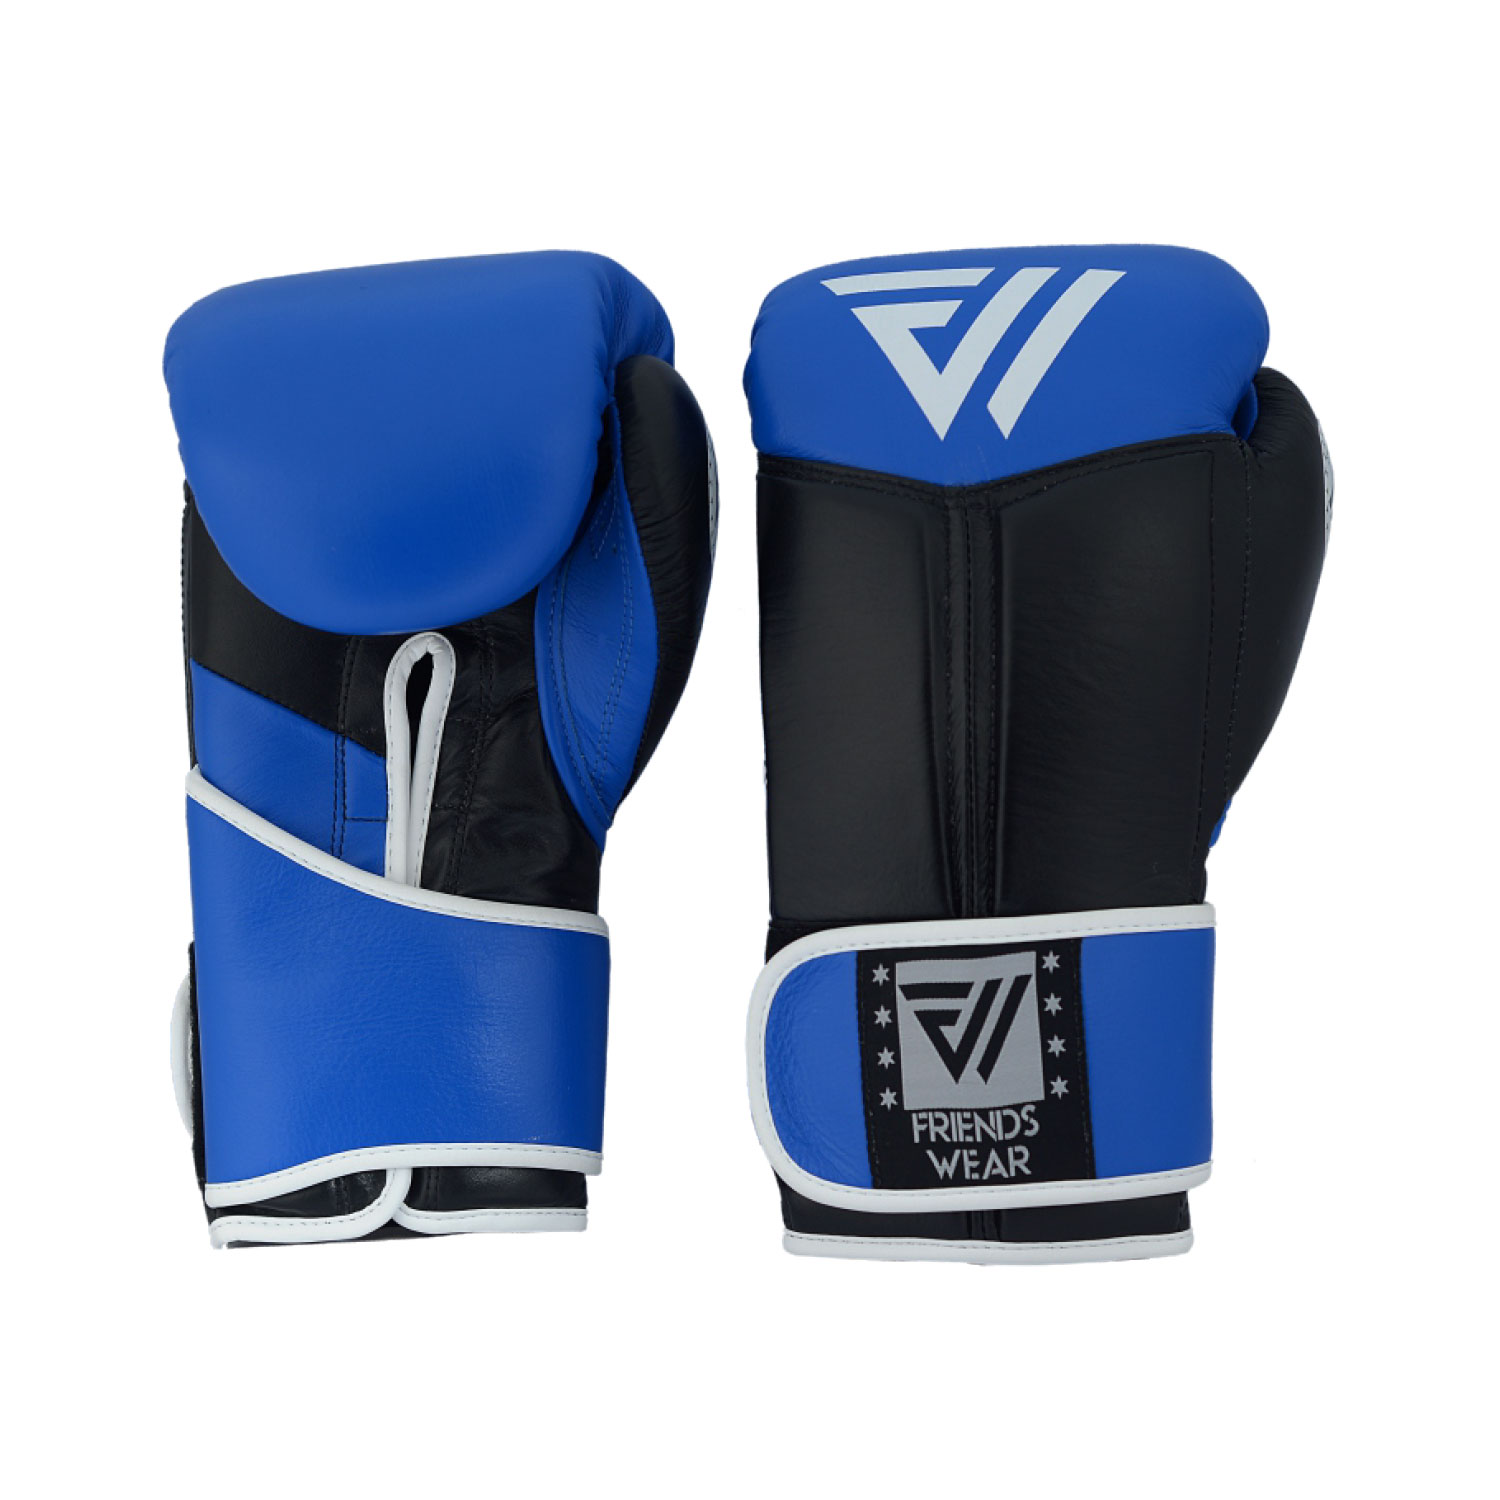 Leather Pro Boxing Gloves